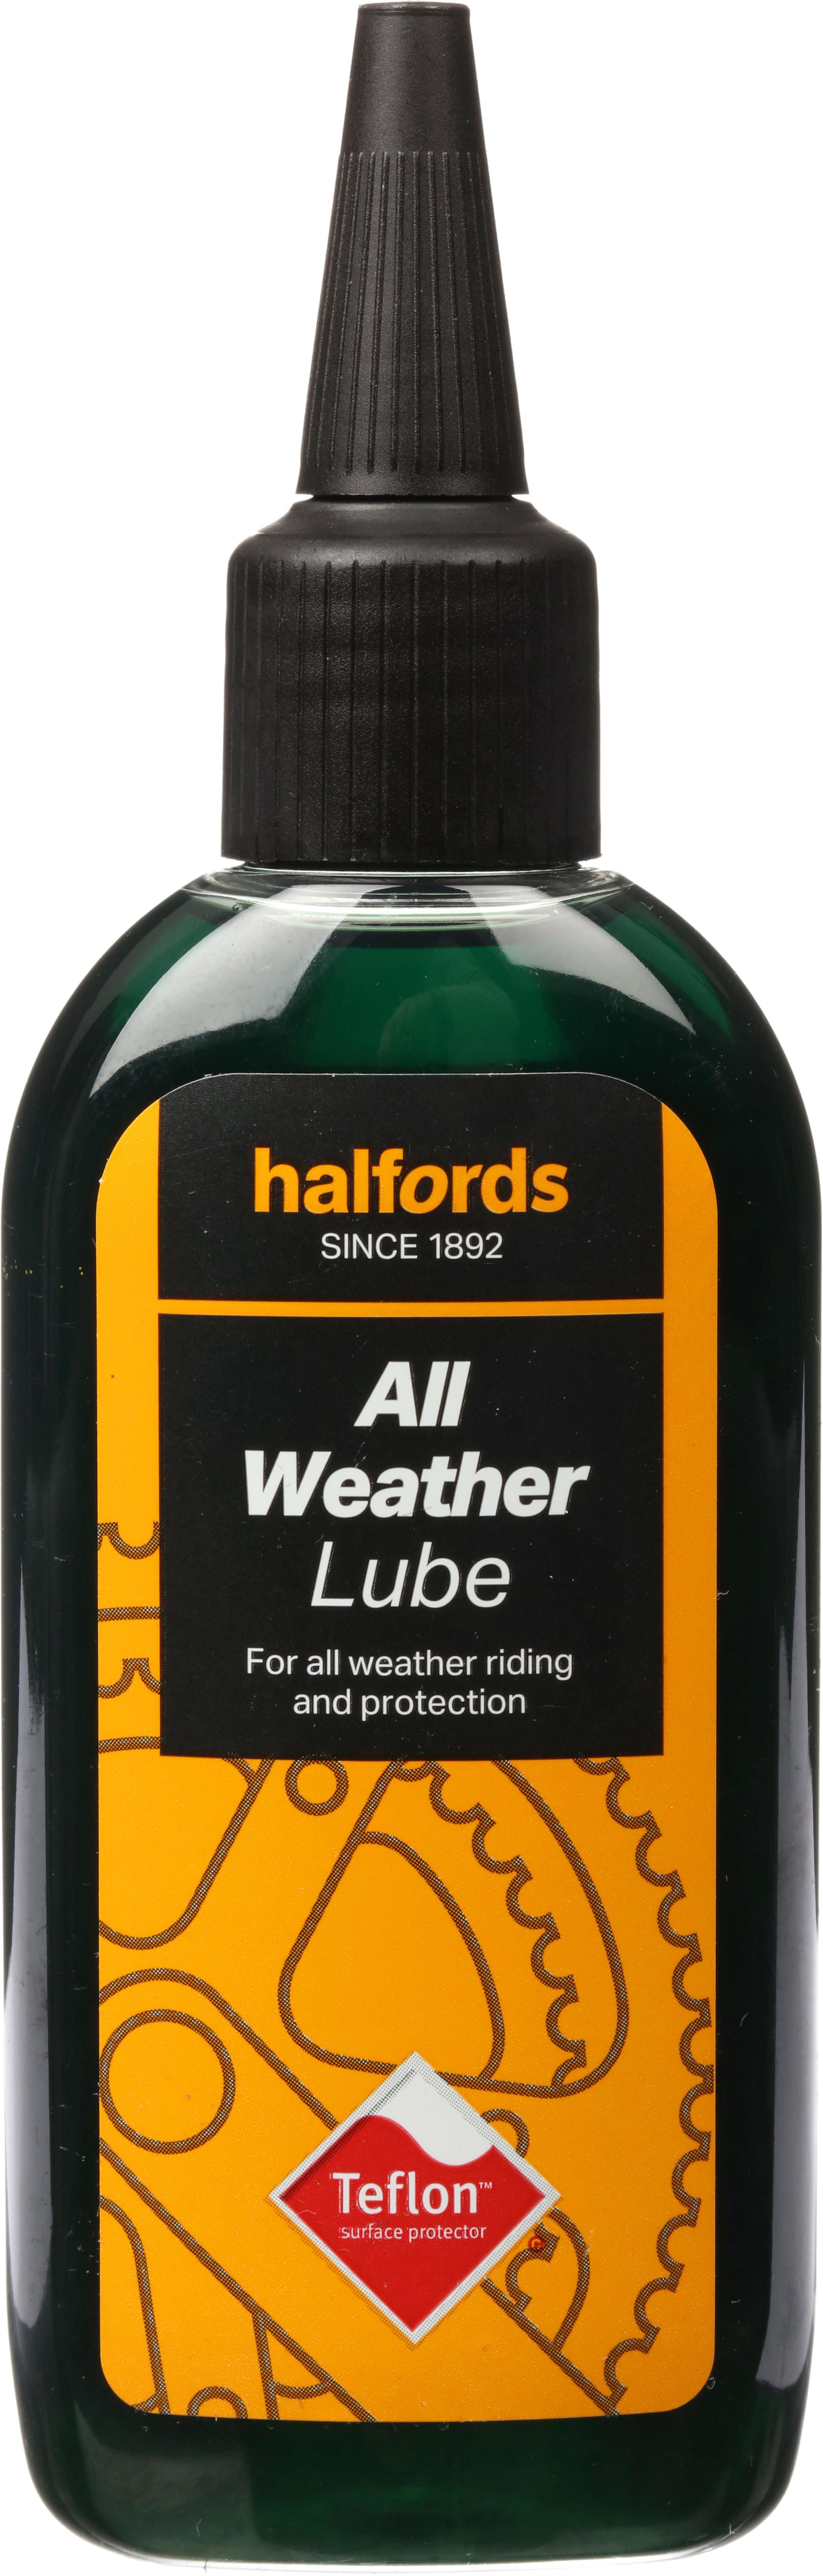 Halfords All Weather Lube 100Ml